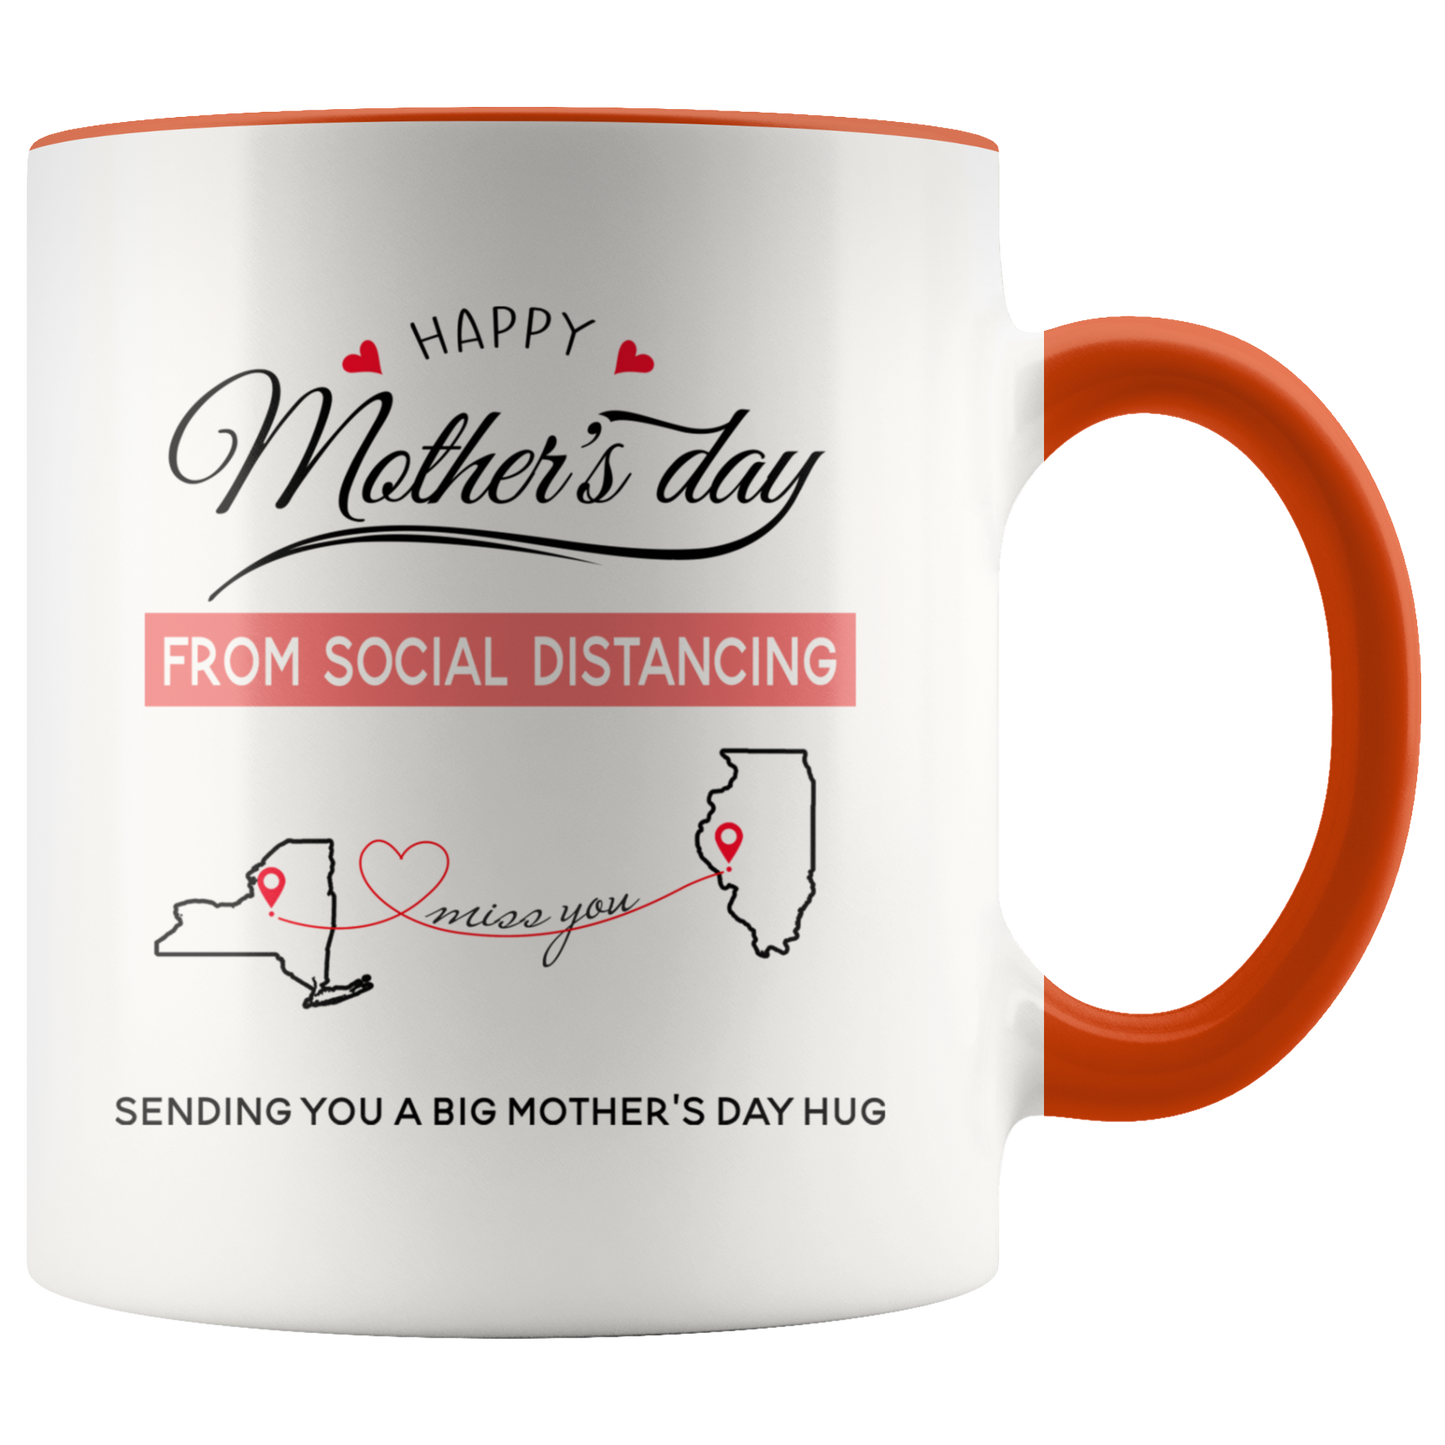 ND-21436139-sp-26961 - [ New York | Illinois ] (CC_Accent_Mug_) Happy Mothers Day From Social Distancing, Sending You A Big